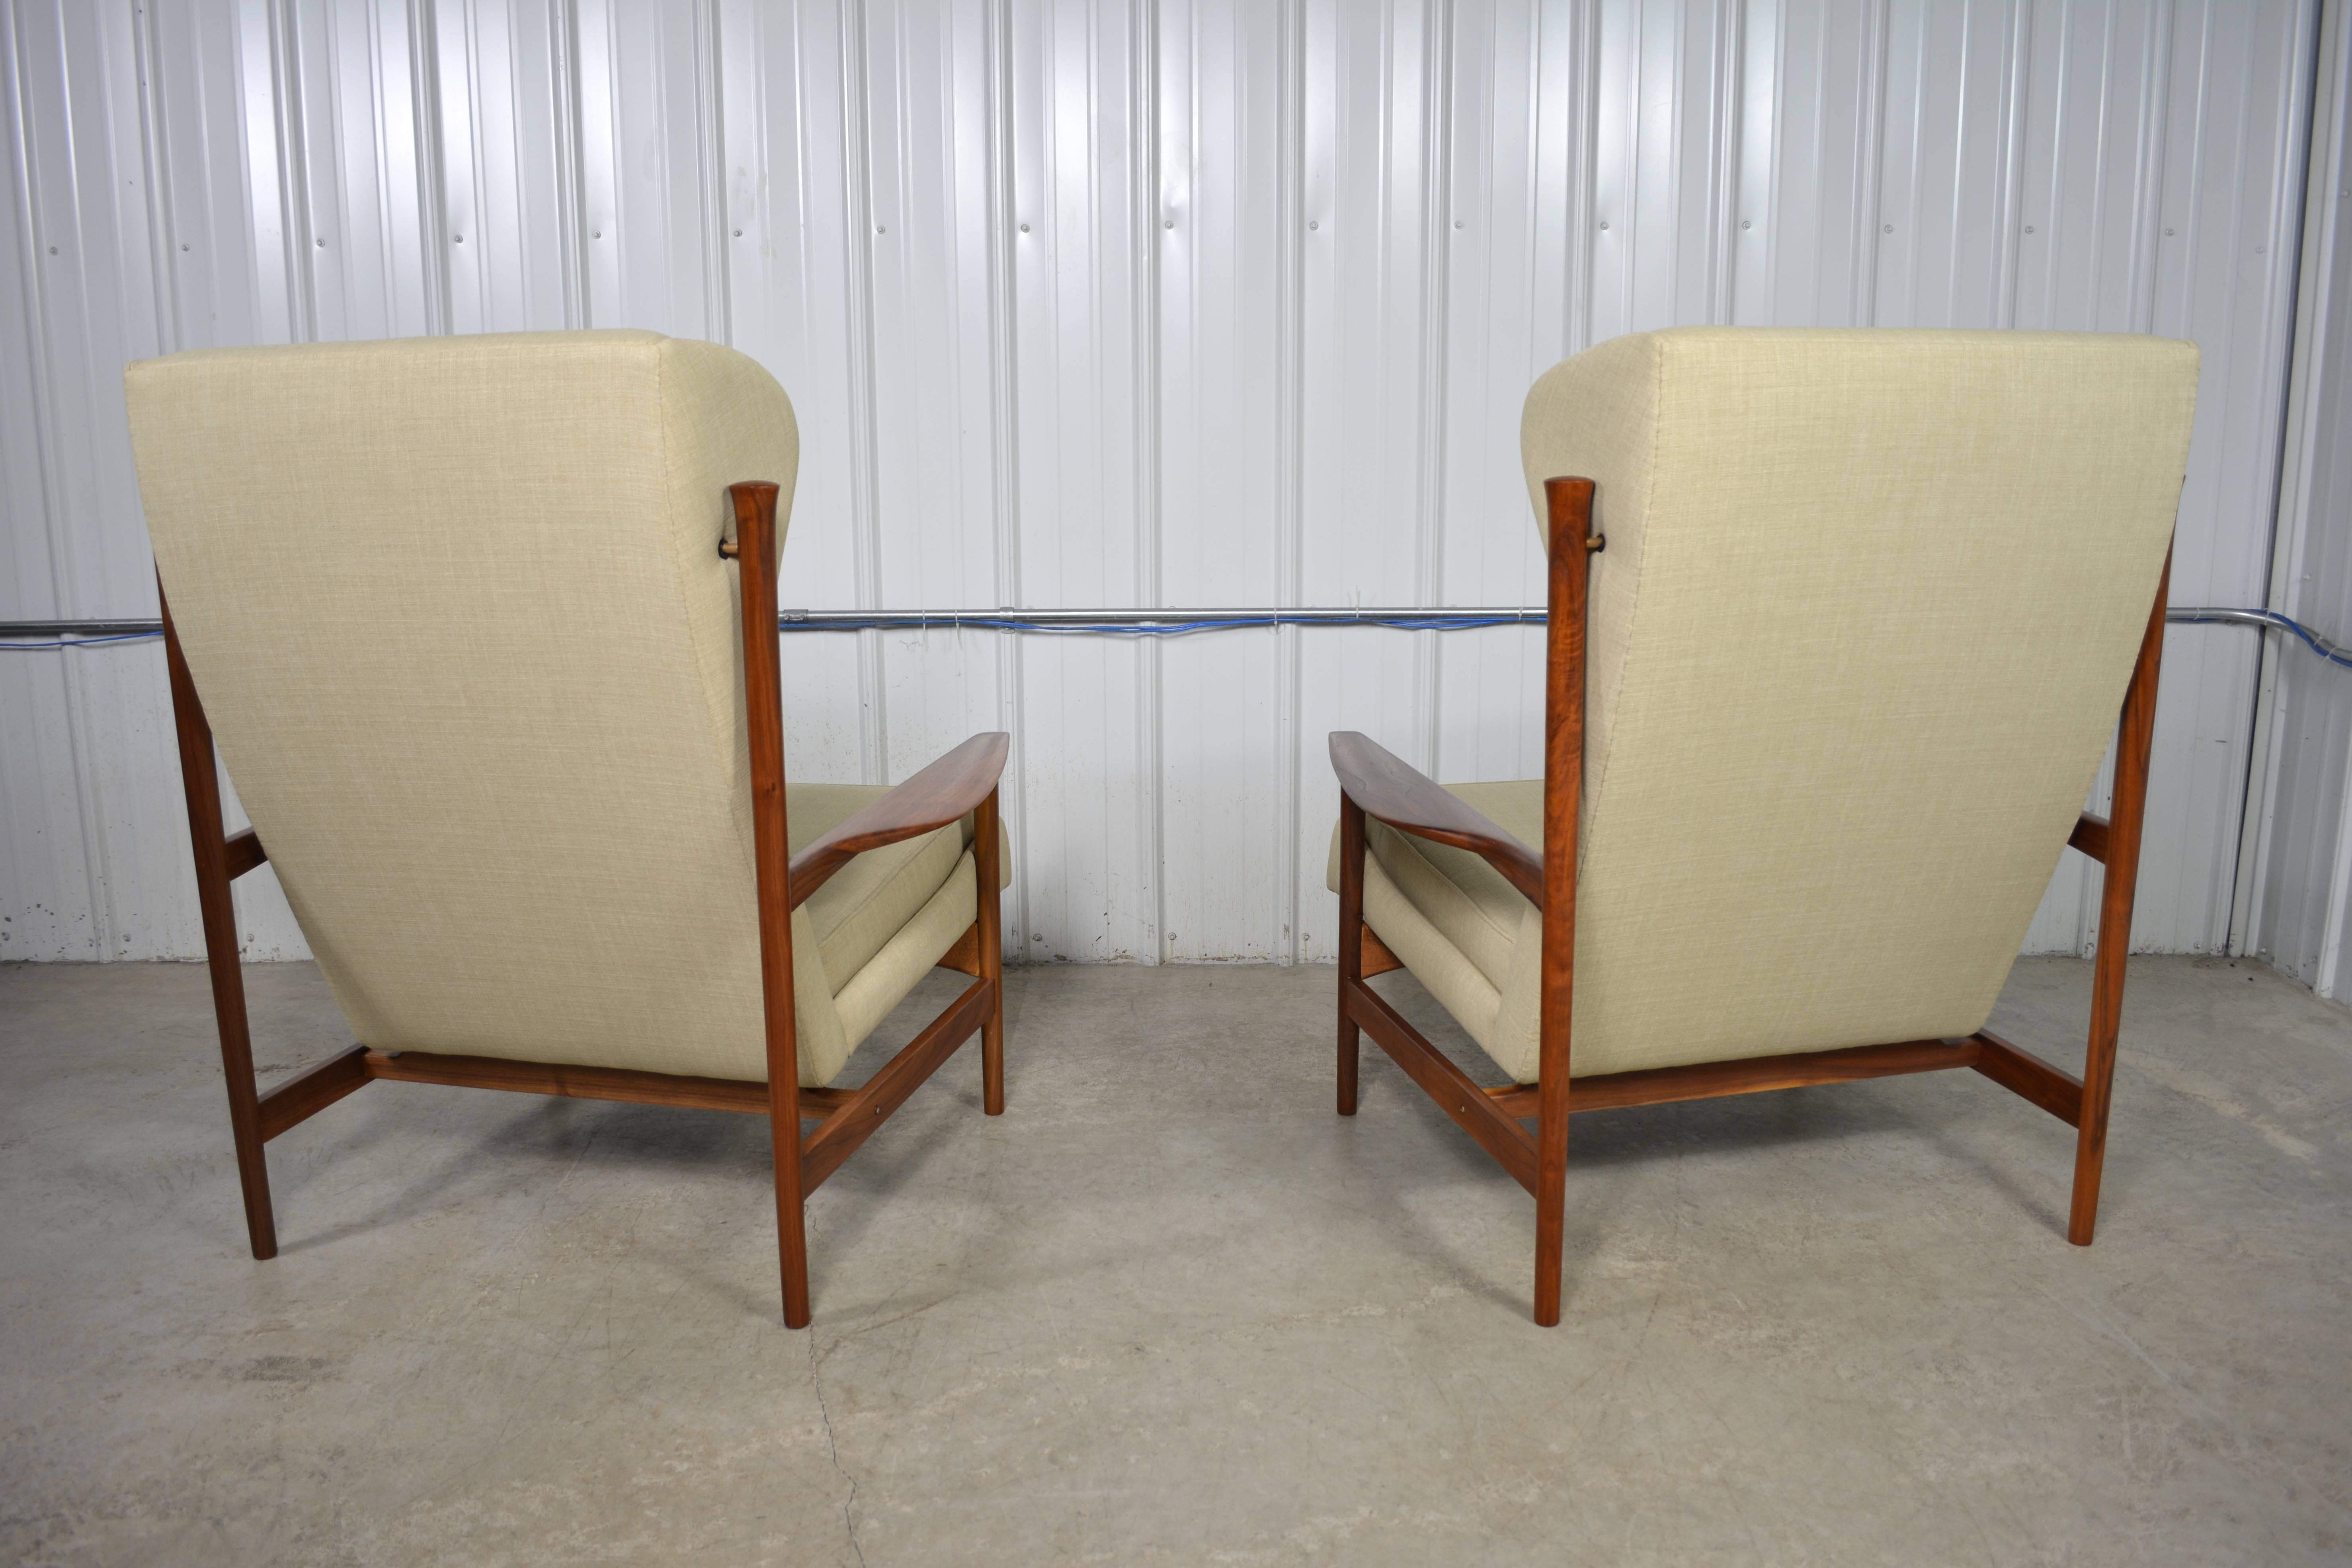 A rare pair of of wingback lounge chairs designed by Ib Kofod-Larsen for Selig. These chairs are generously proportioned. Beautiful solid walnut frames. Newly restored.